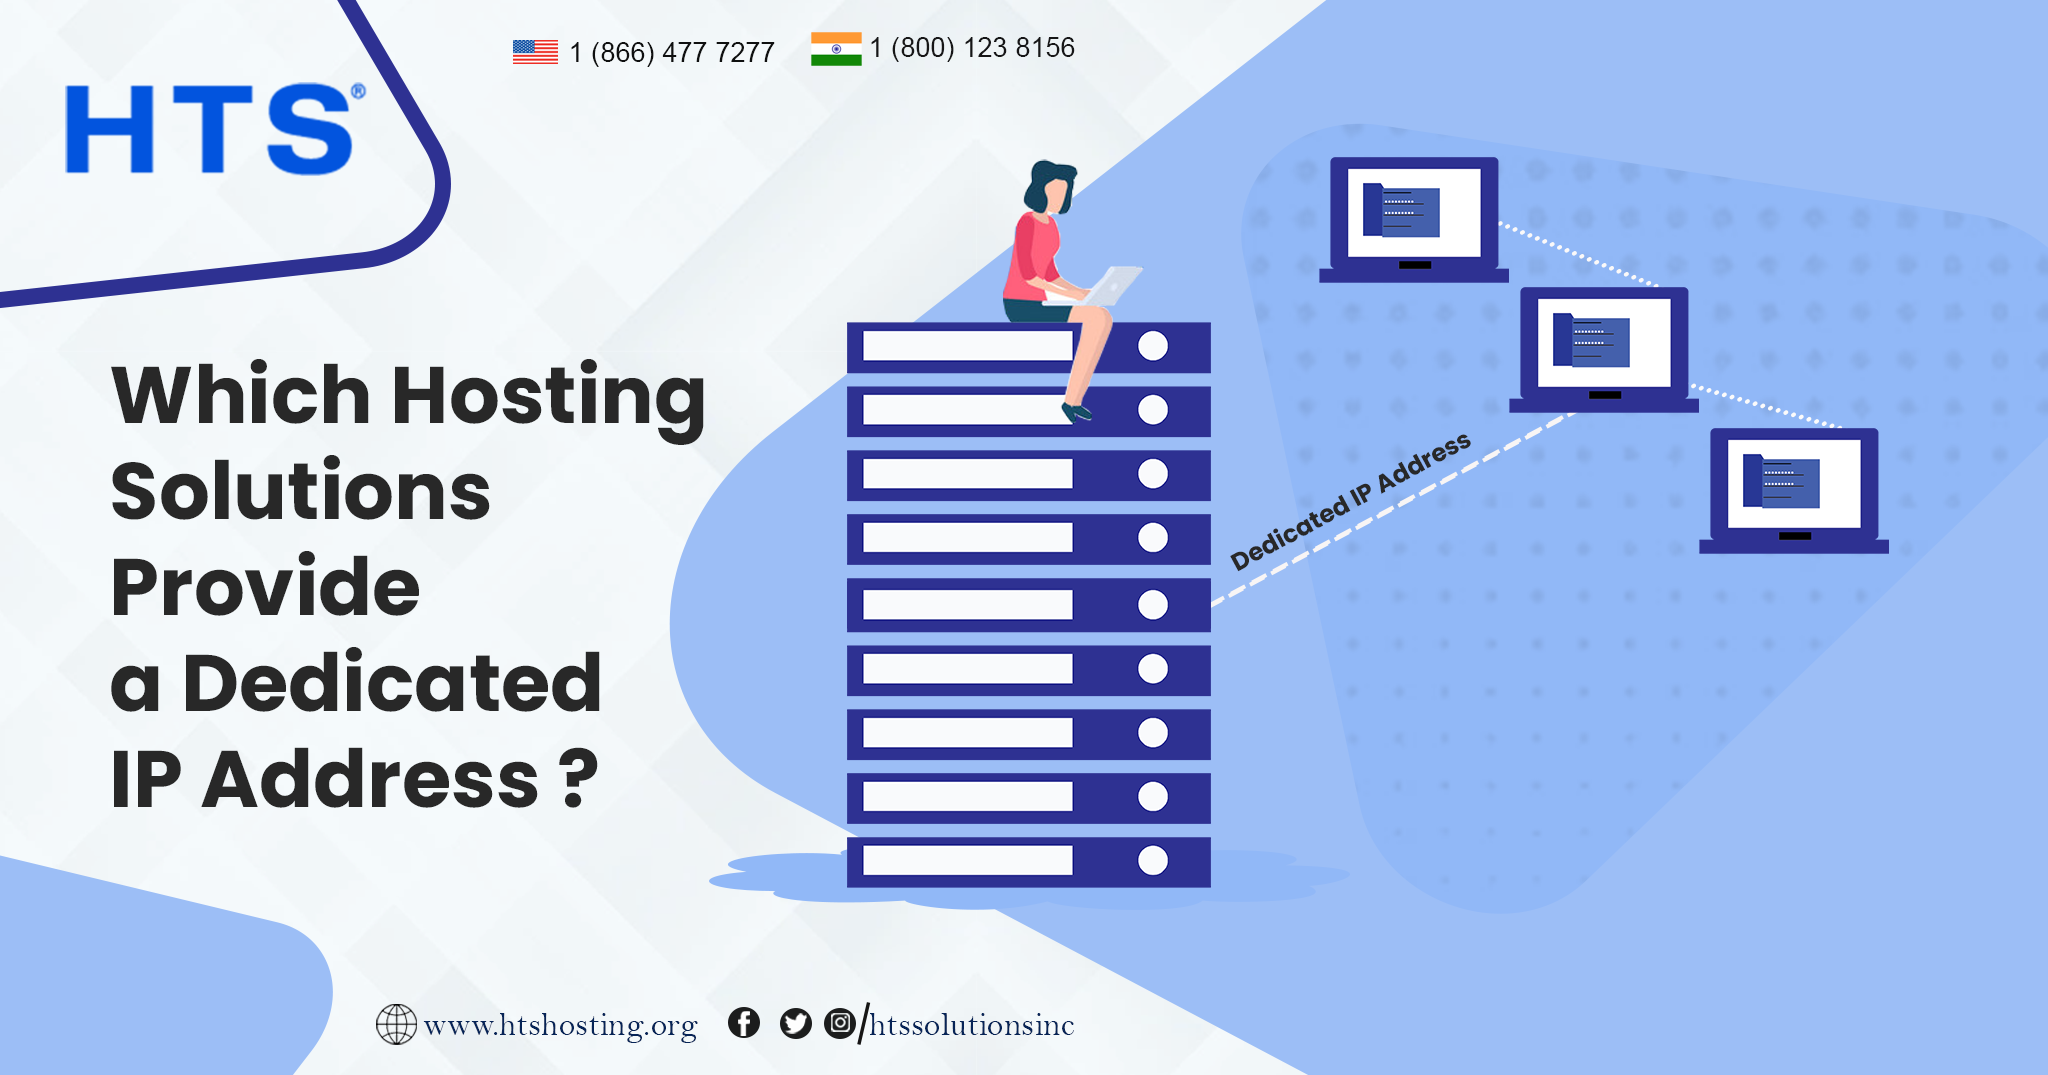 Which Hosting Solutions Provide a Dedicated IP Address?